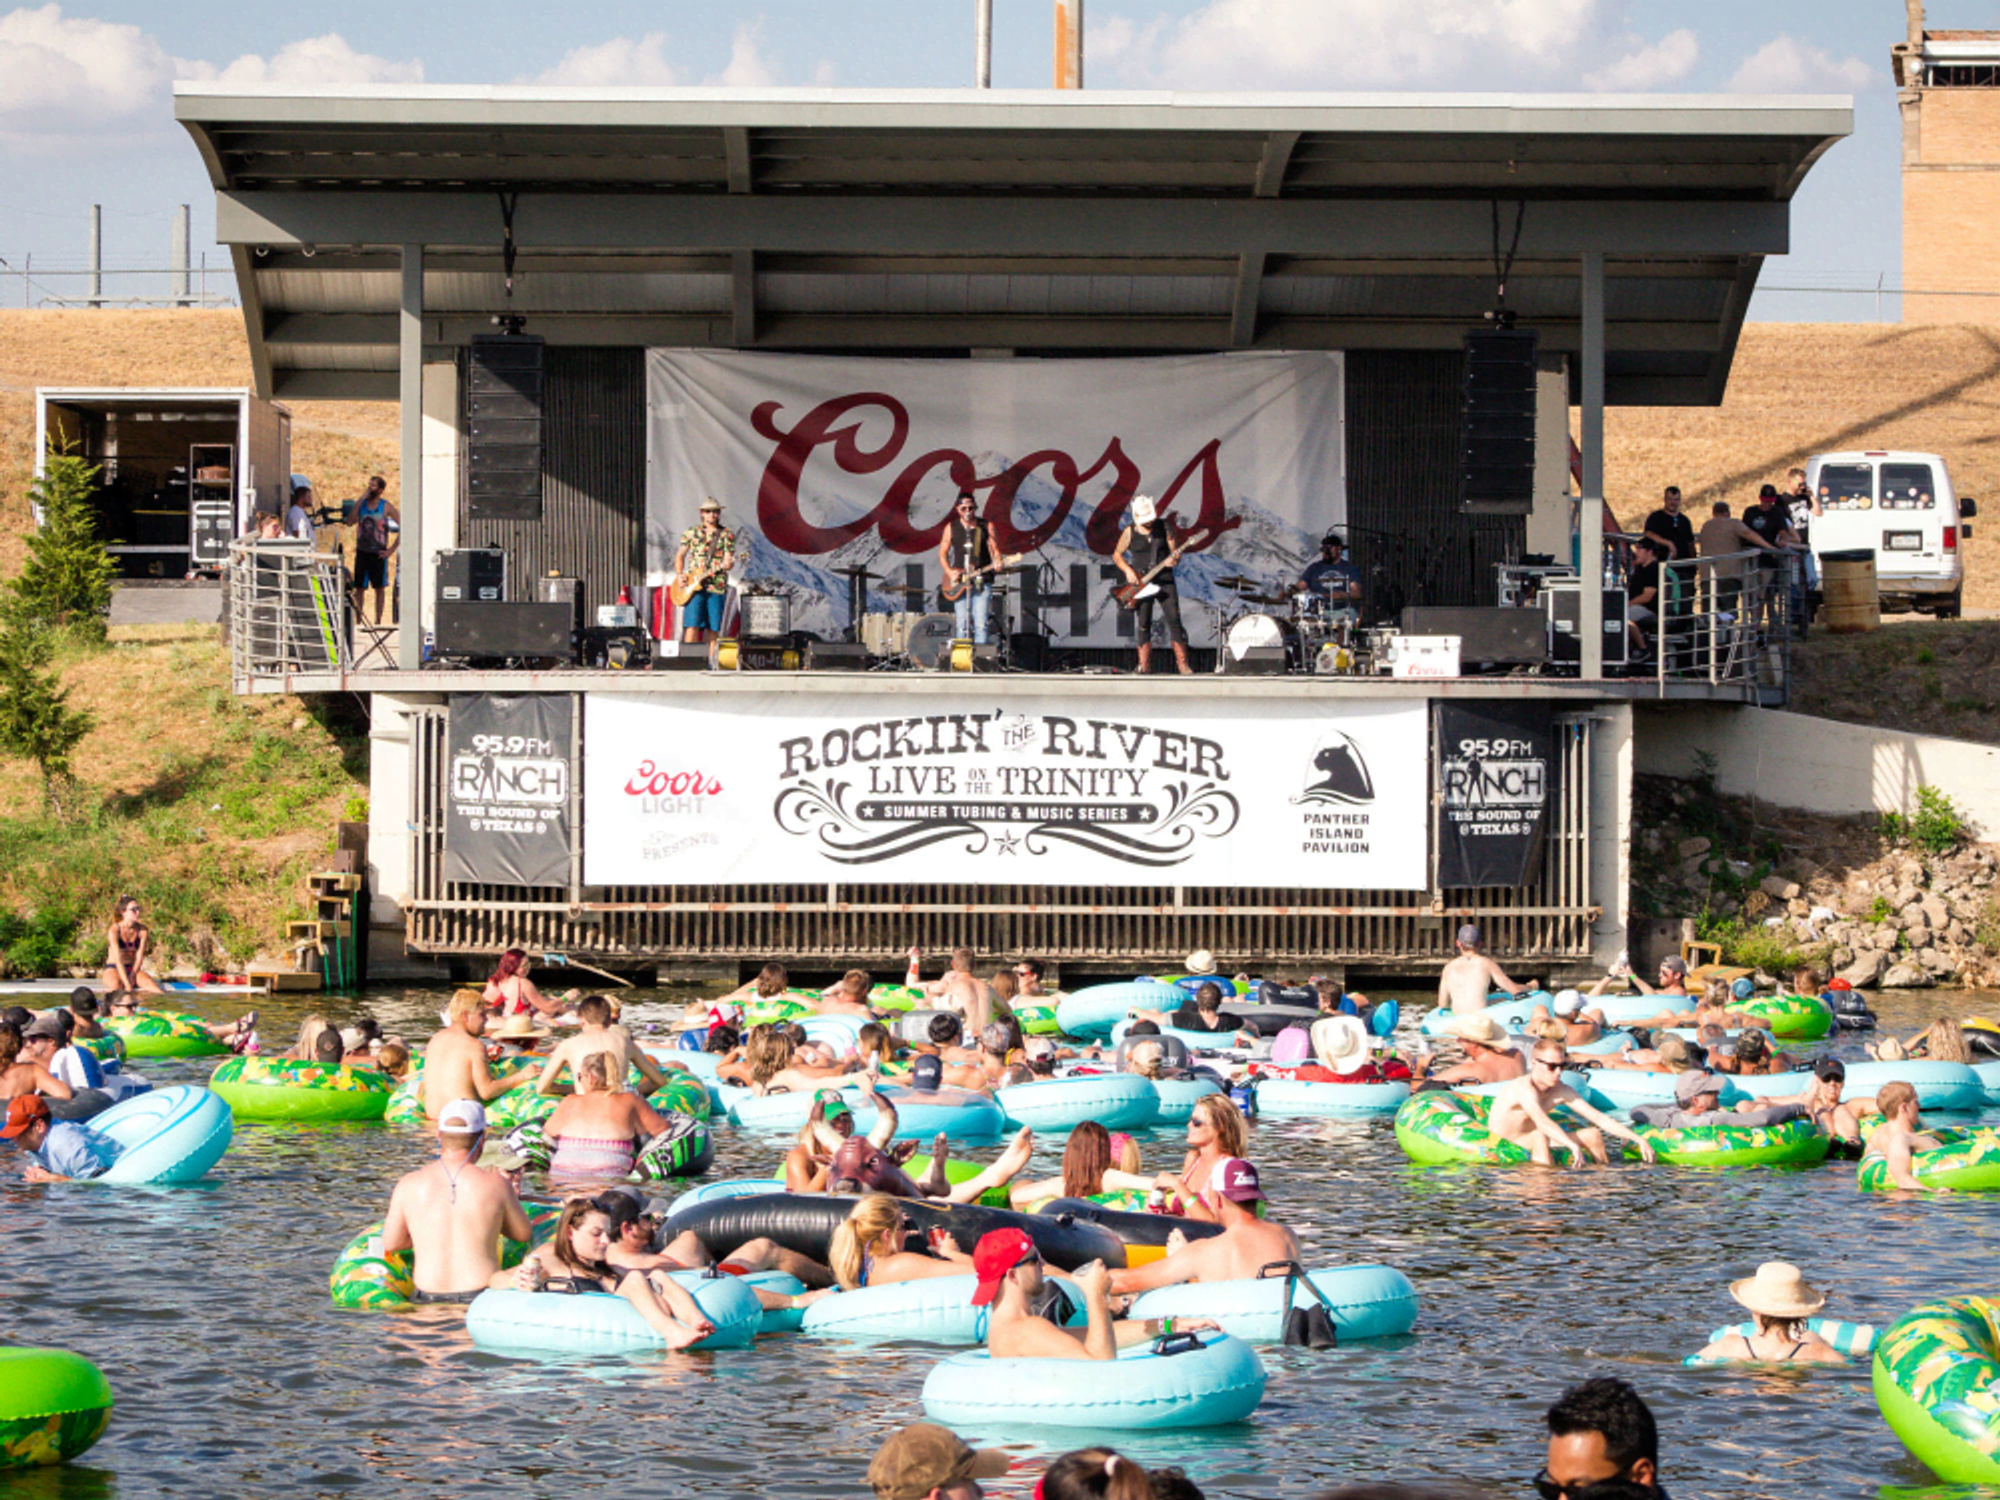 The Rockin' the River series comes to a close with two concerts, one on August 11 and one on August 13.